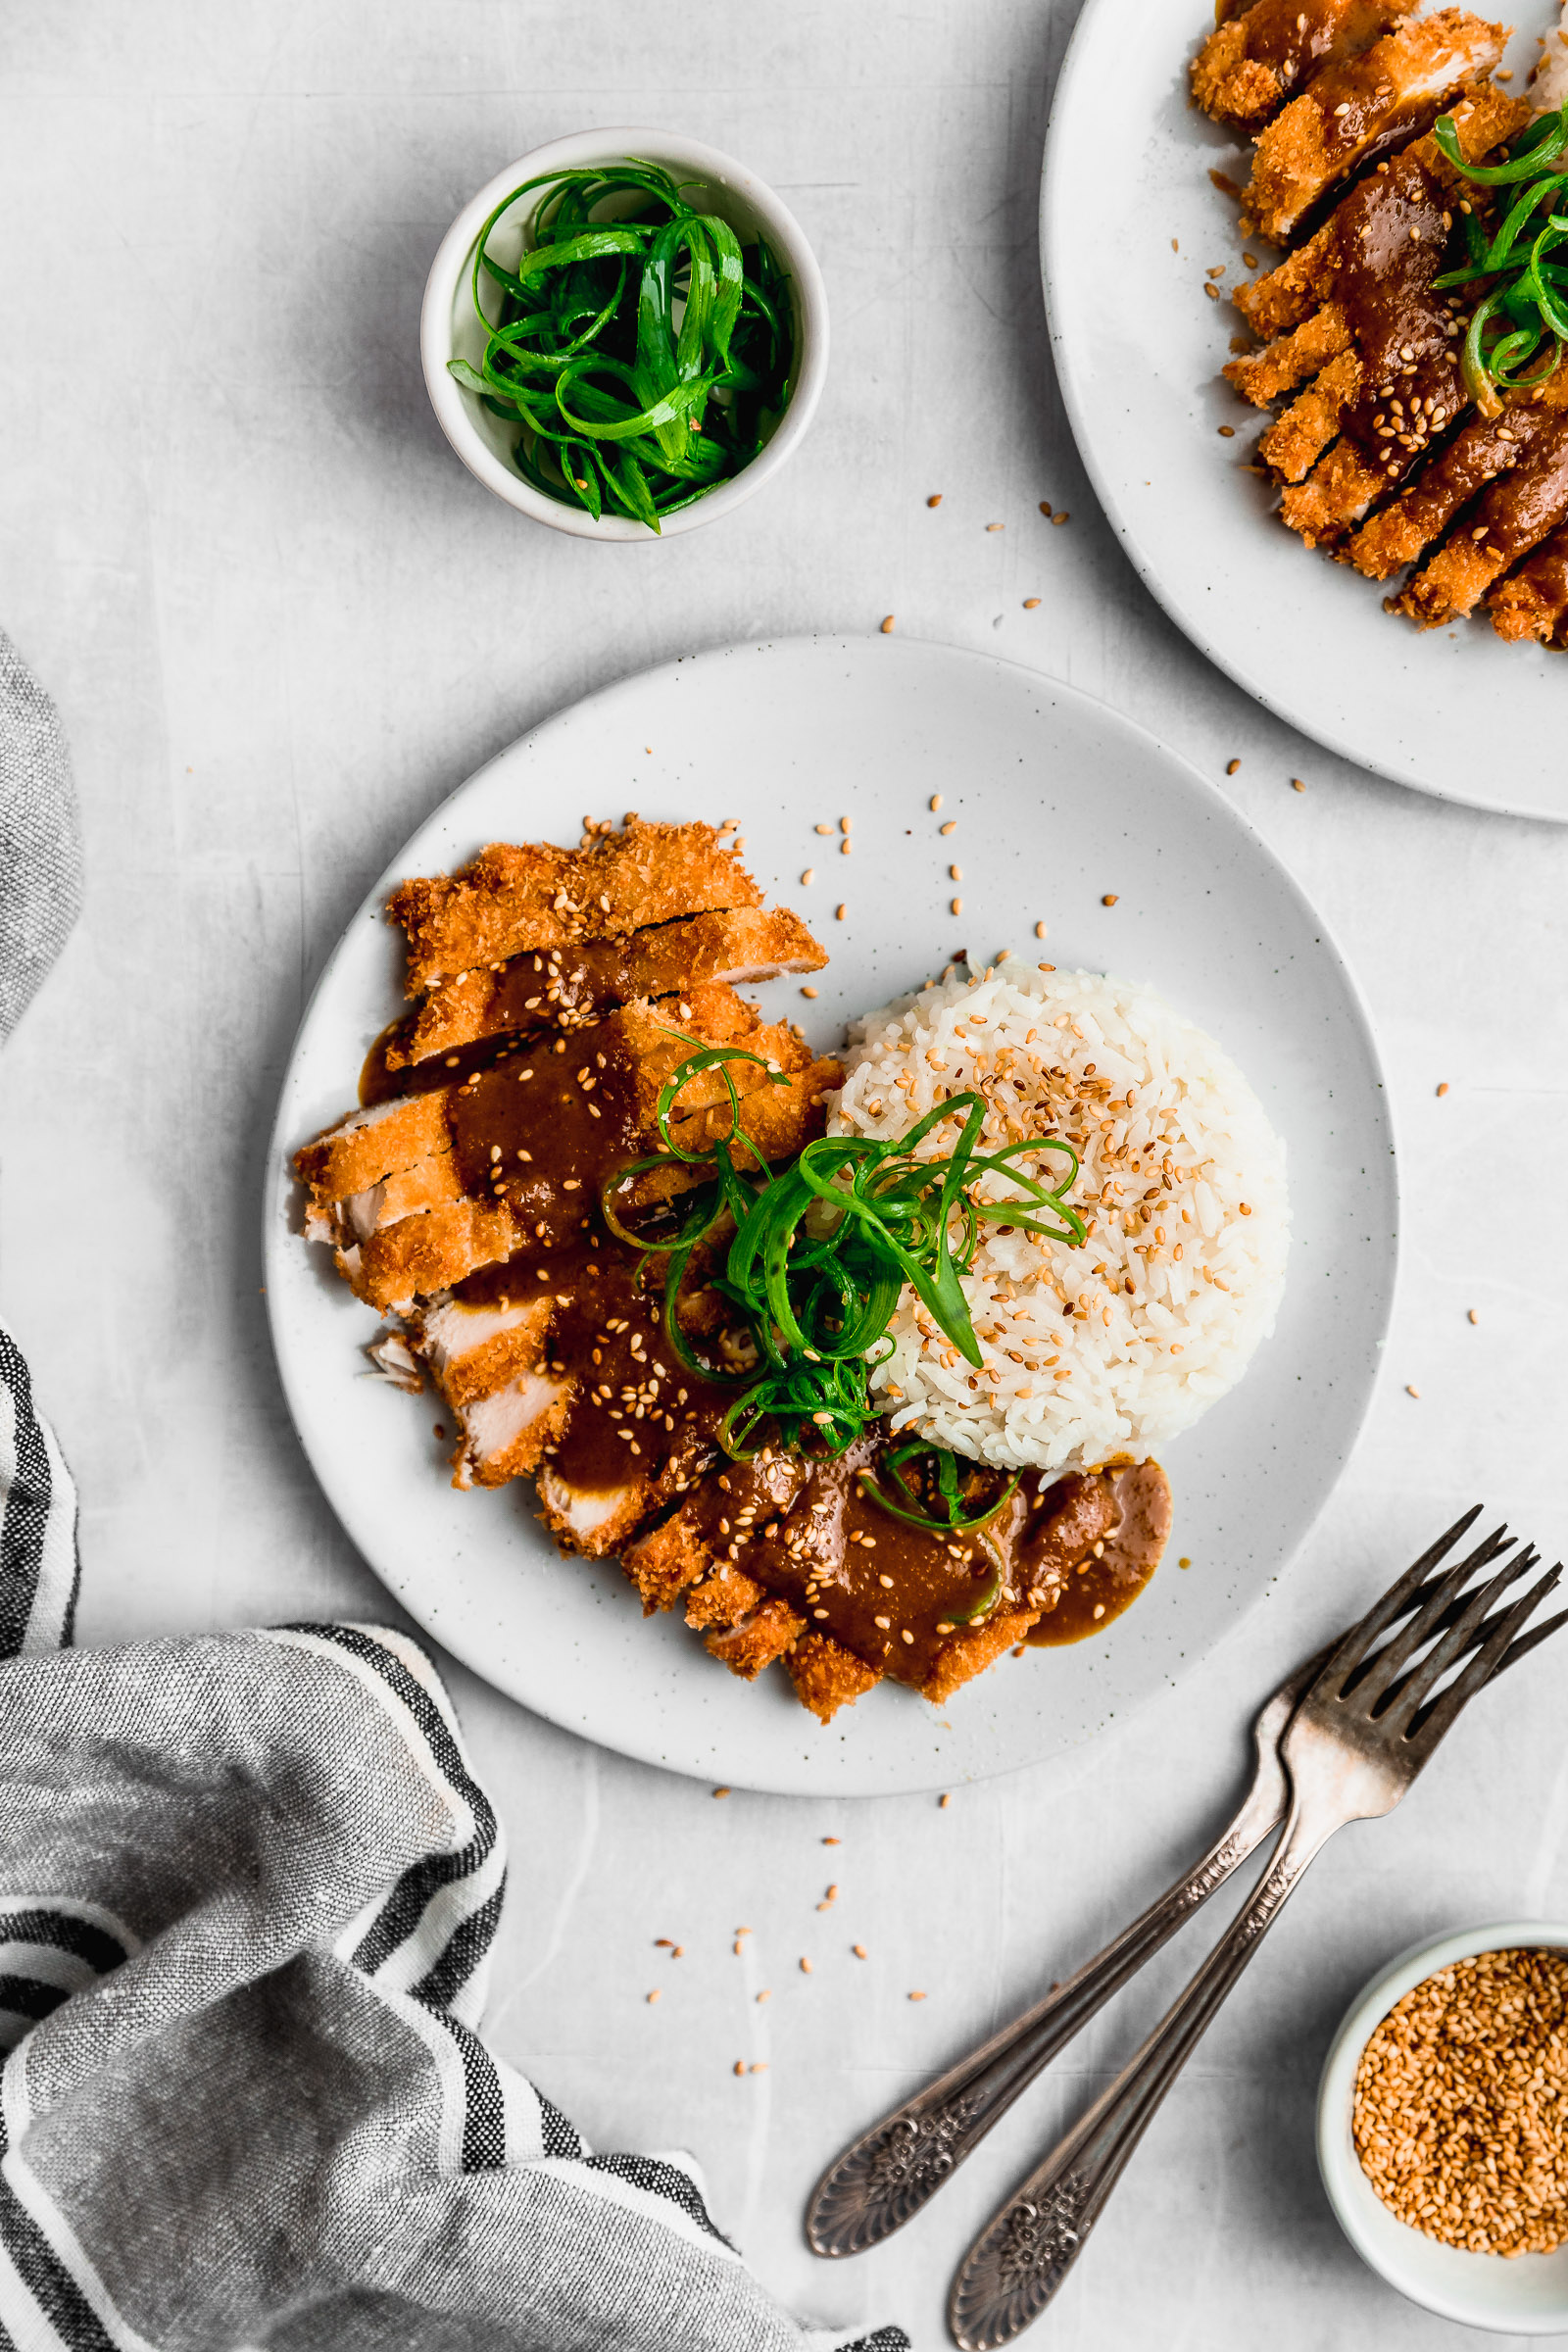 Top View of Chicken Katsu Curry: panko chicken served with rice, curry sauce, sesame seeds, green onion.